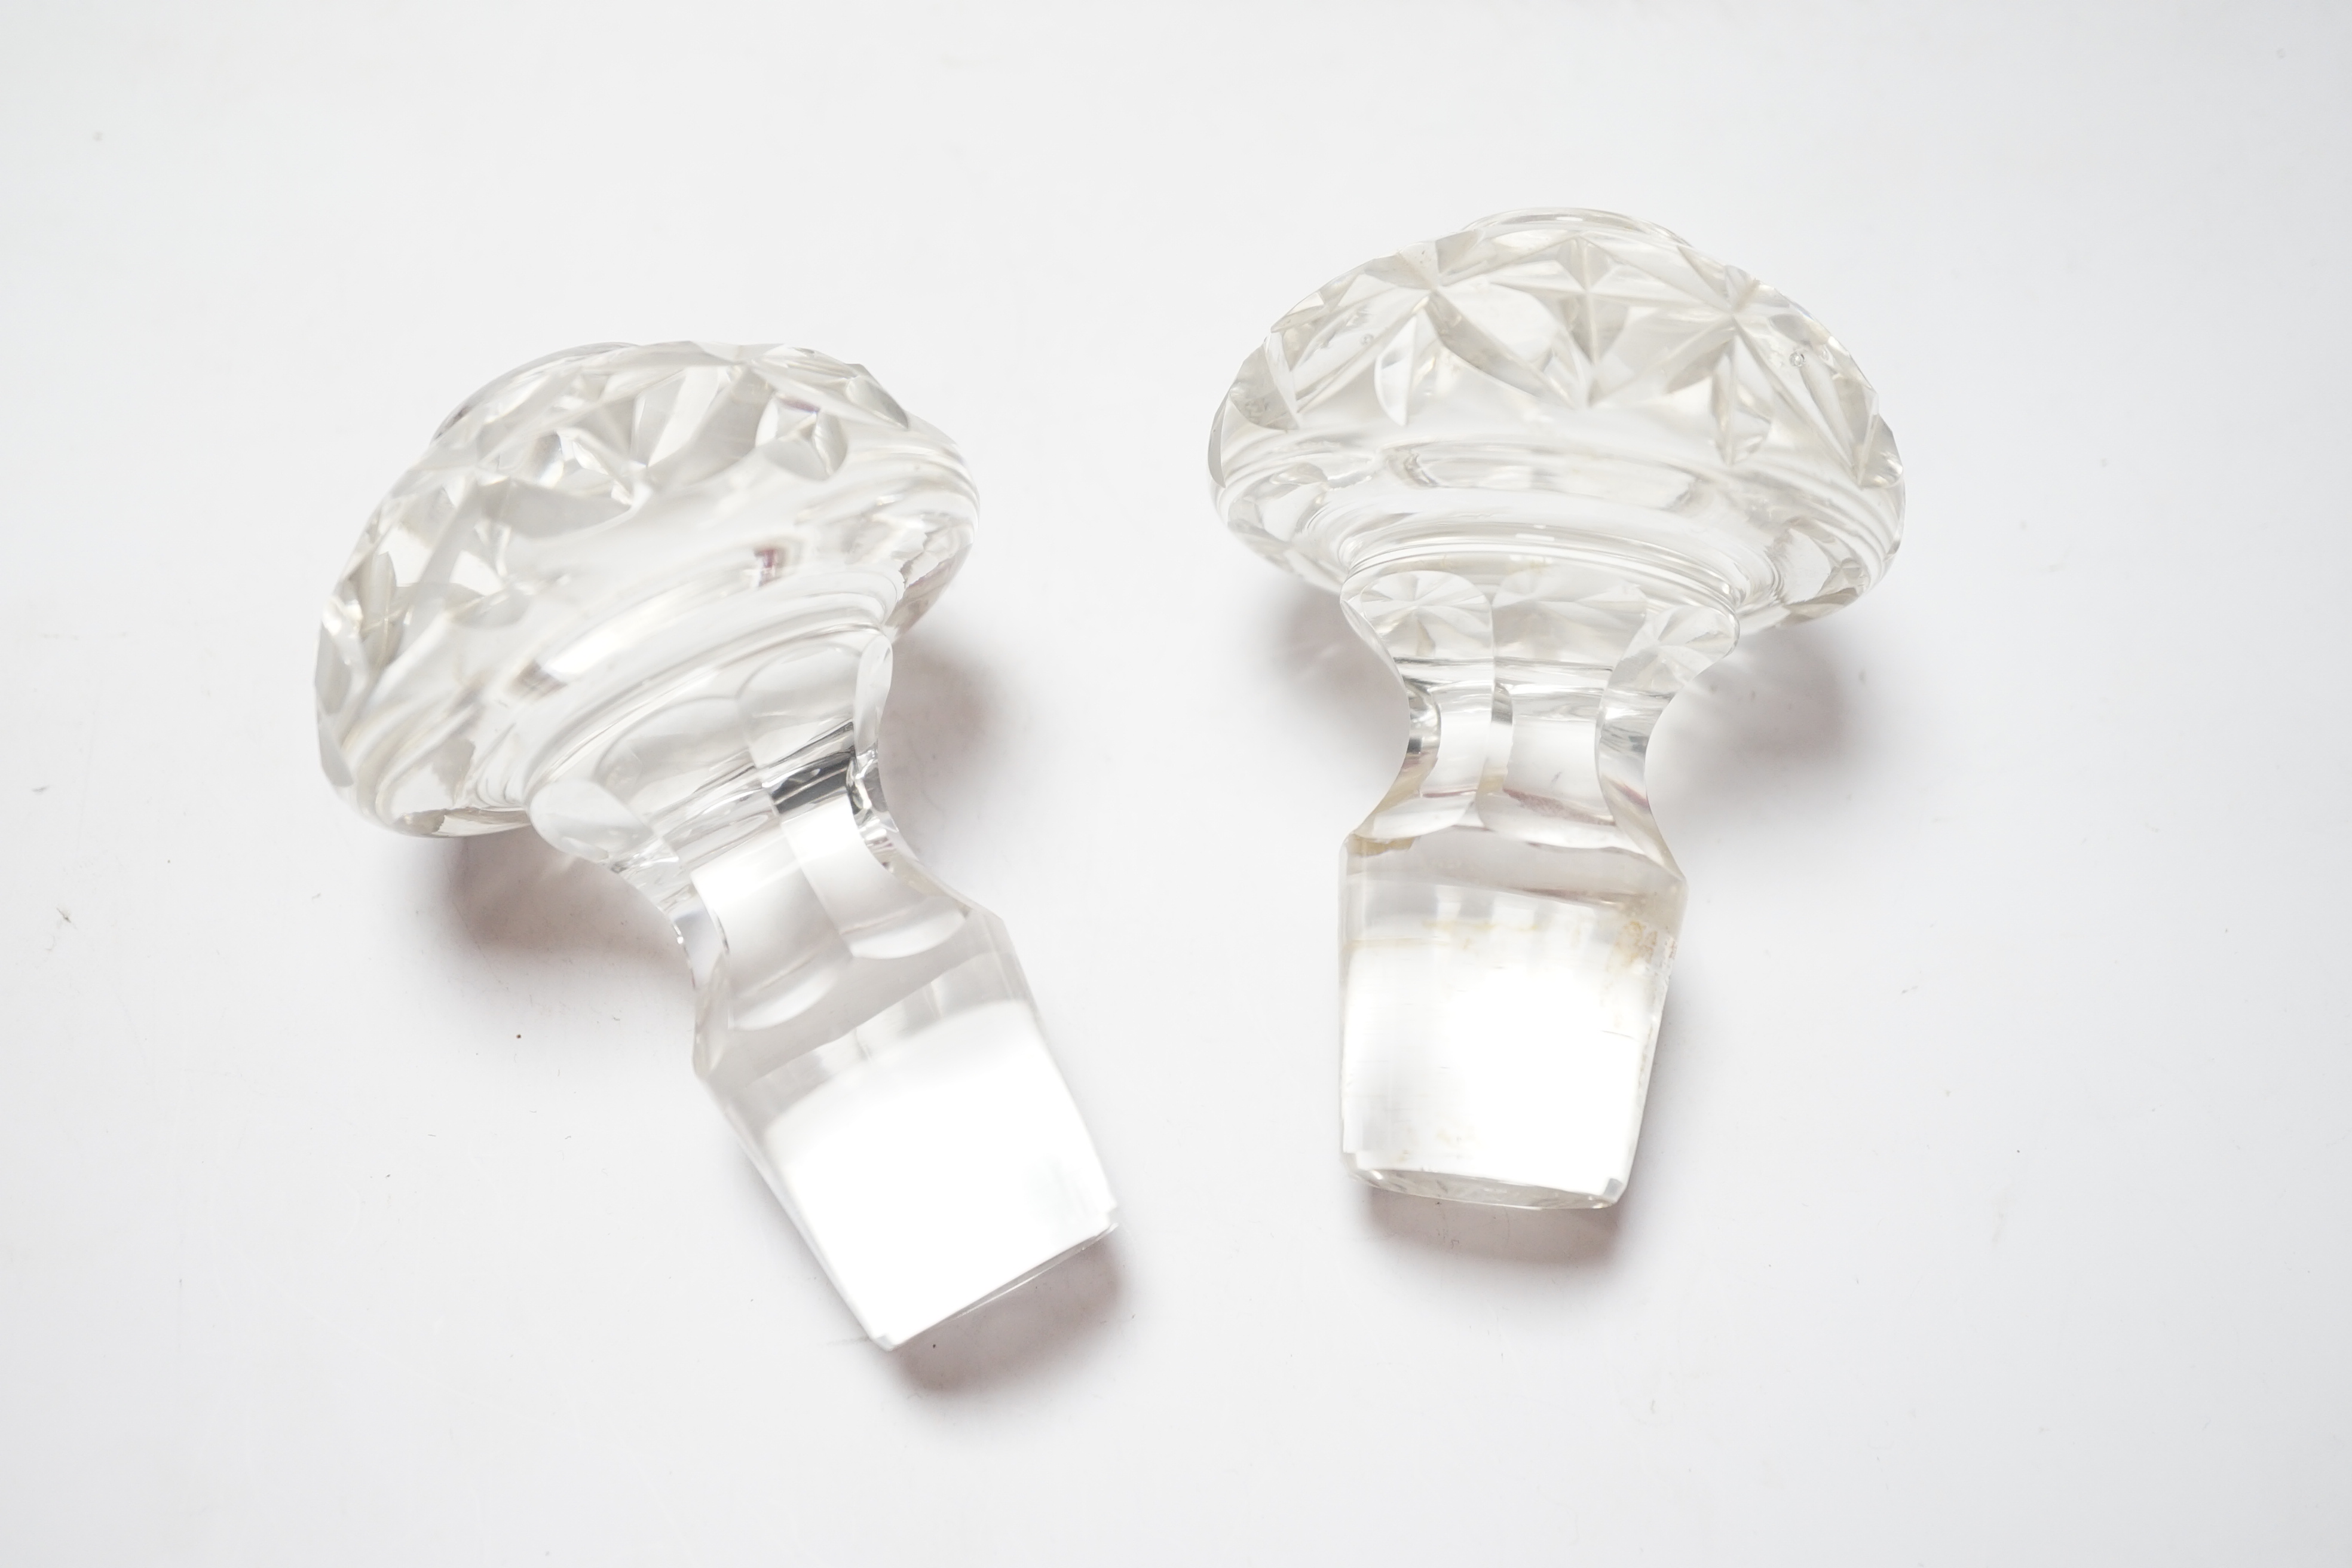 A pair of large Regency style cut glass magnum decanters and stoppers, 39cm high